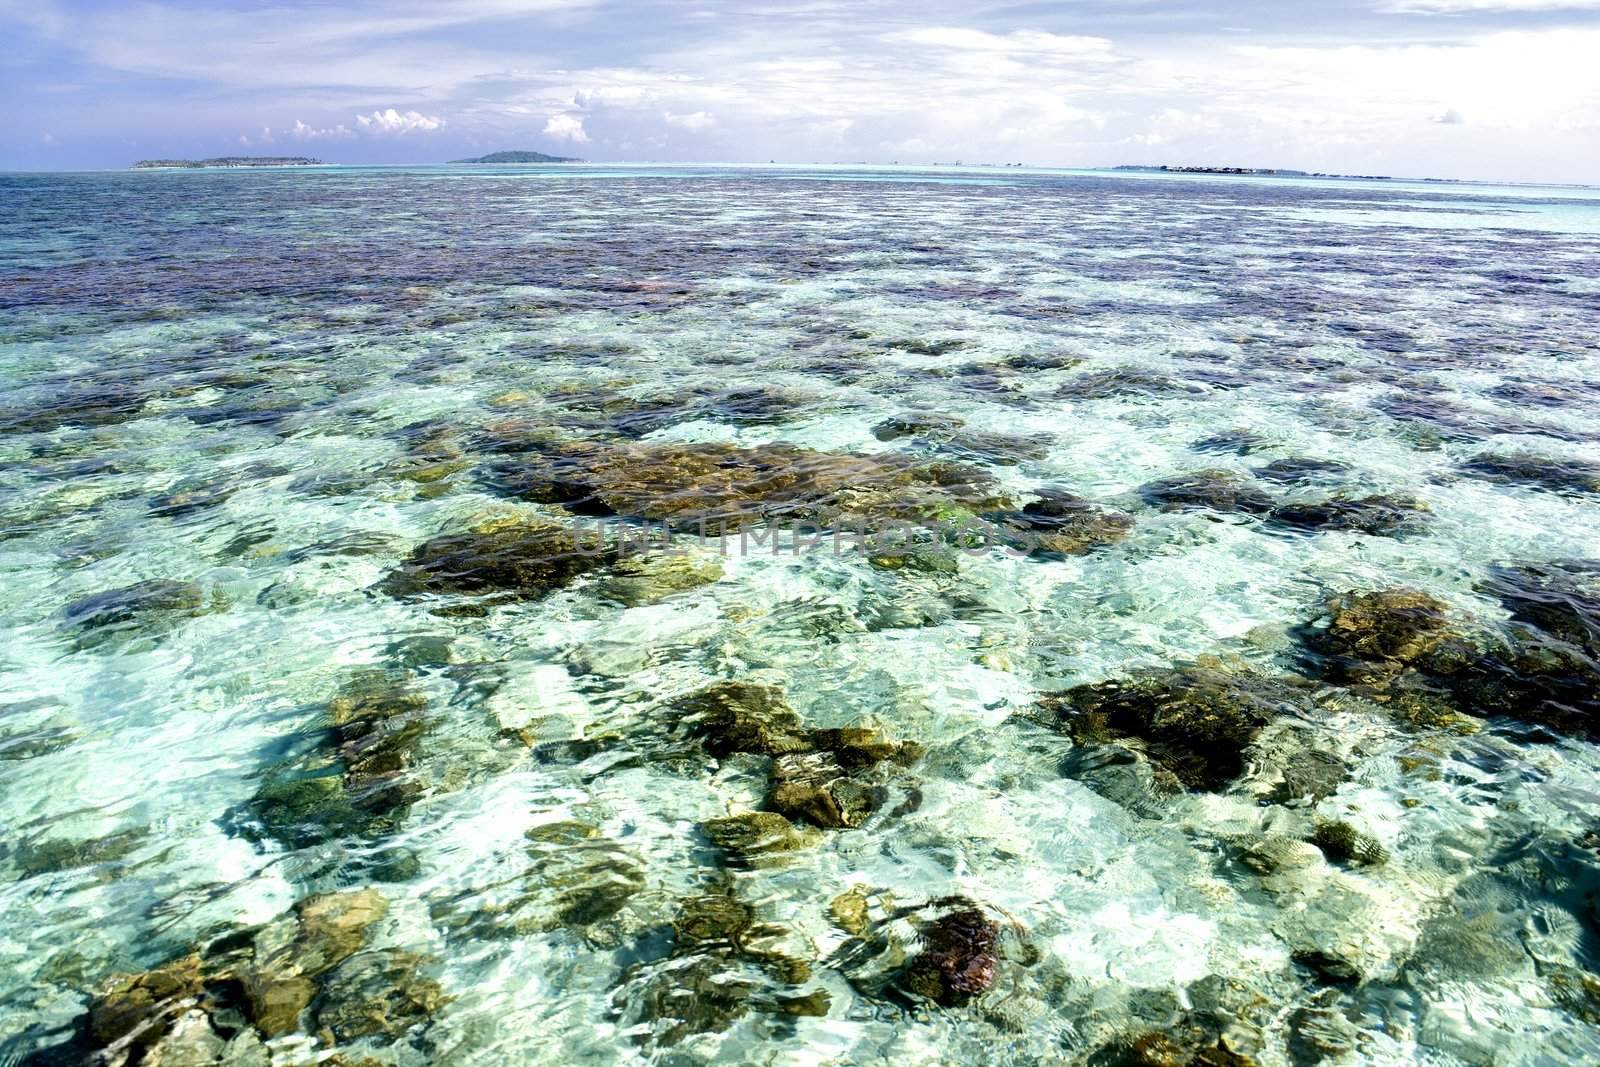 Image of the shallow open sea with crystal clear waters and corals in Malaysian waters.